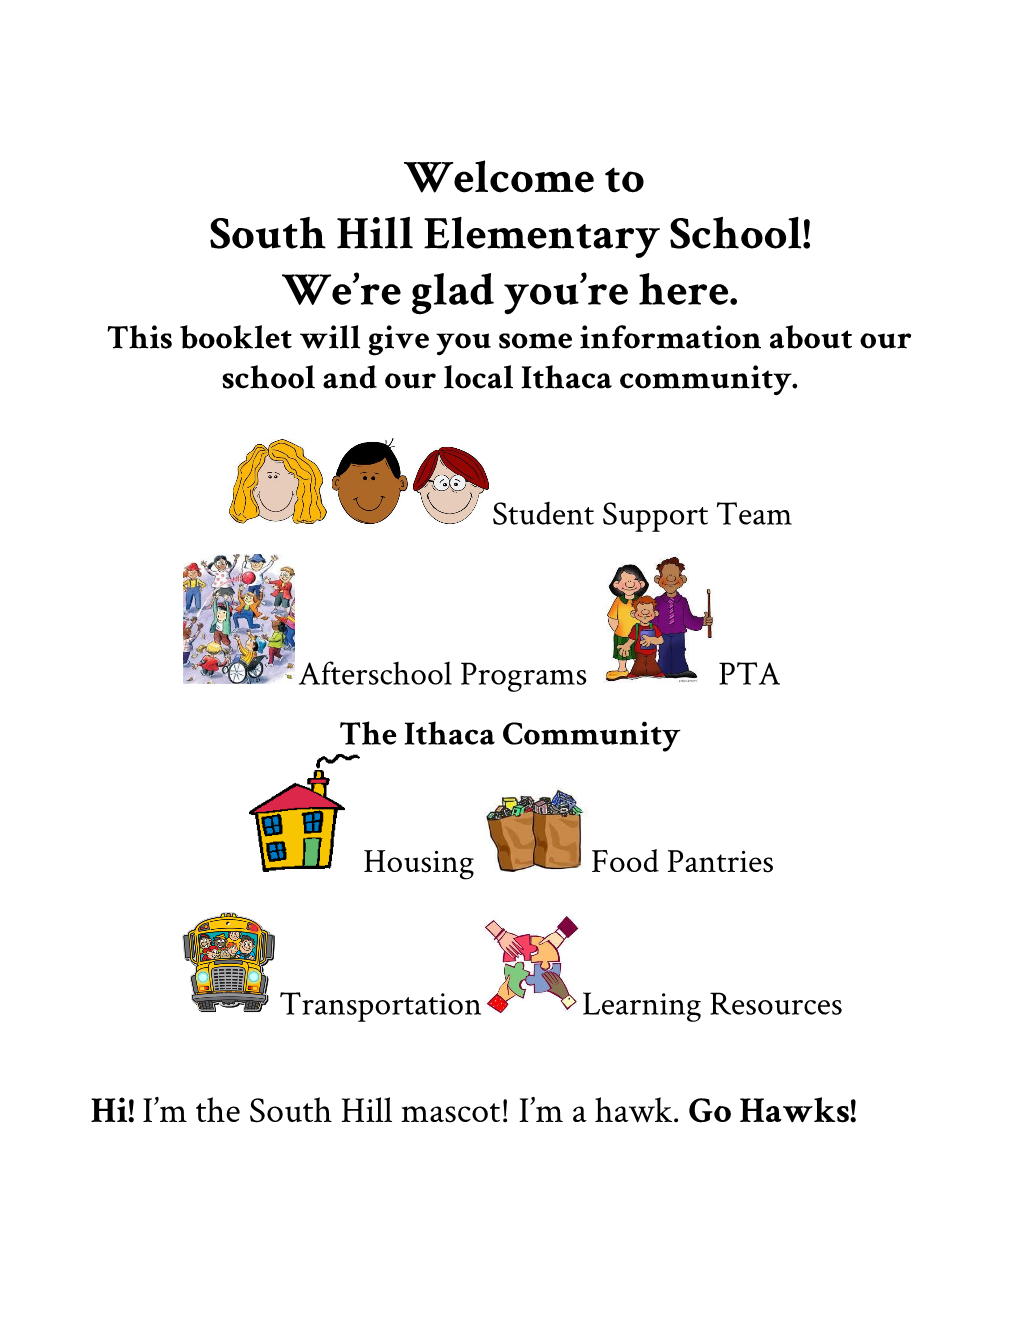 Welcome to South Hill Elementary School! We're Glad You're Here